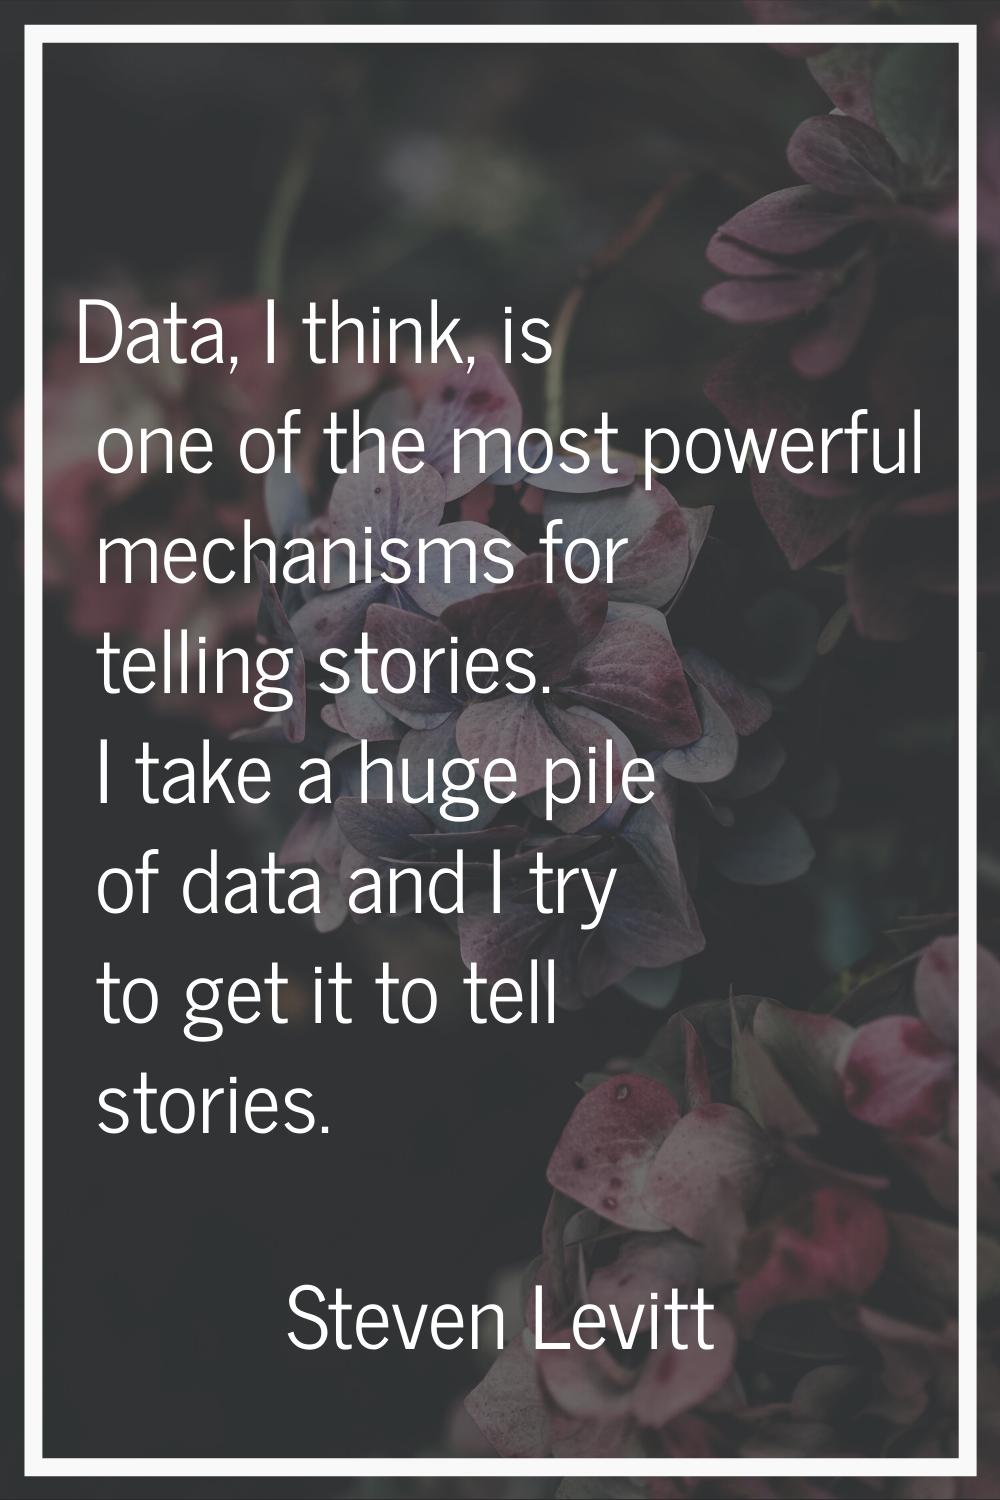 Data, I think, is one of the most powerful mechanisms for telling stories. I take a huge pile of da